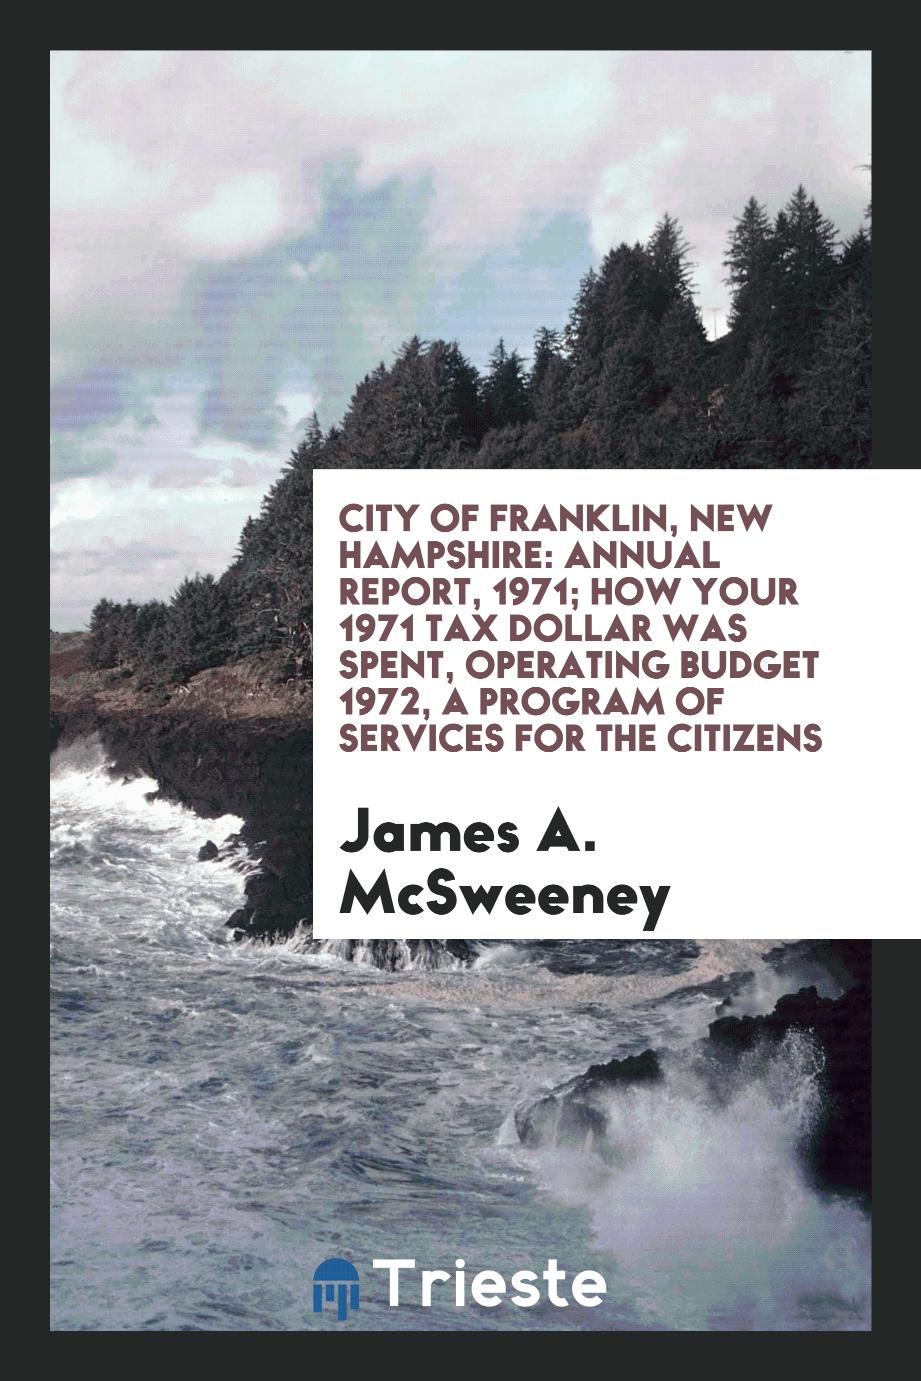 City of Franklin, New Hampshire: Annual Report, 1971; How Your 1971 Tax Dollar Was Spent, Operating Budget 1972, a Program of Services for the Citizens